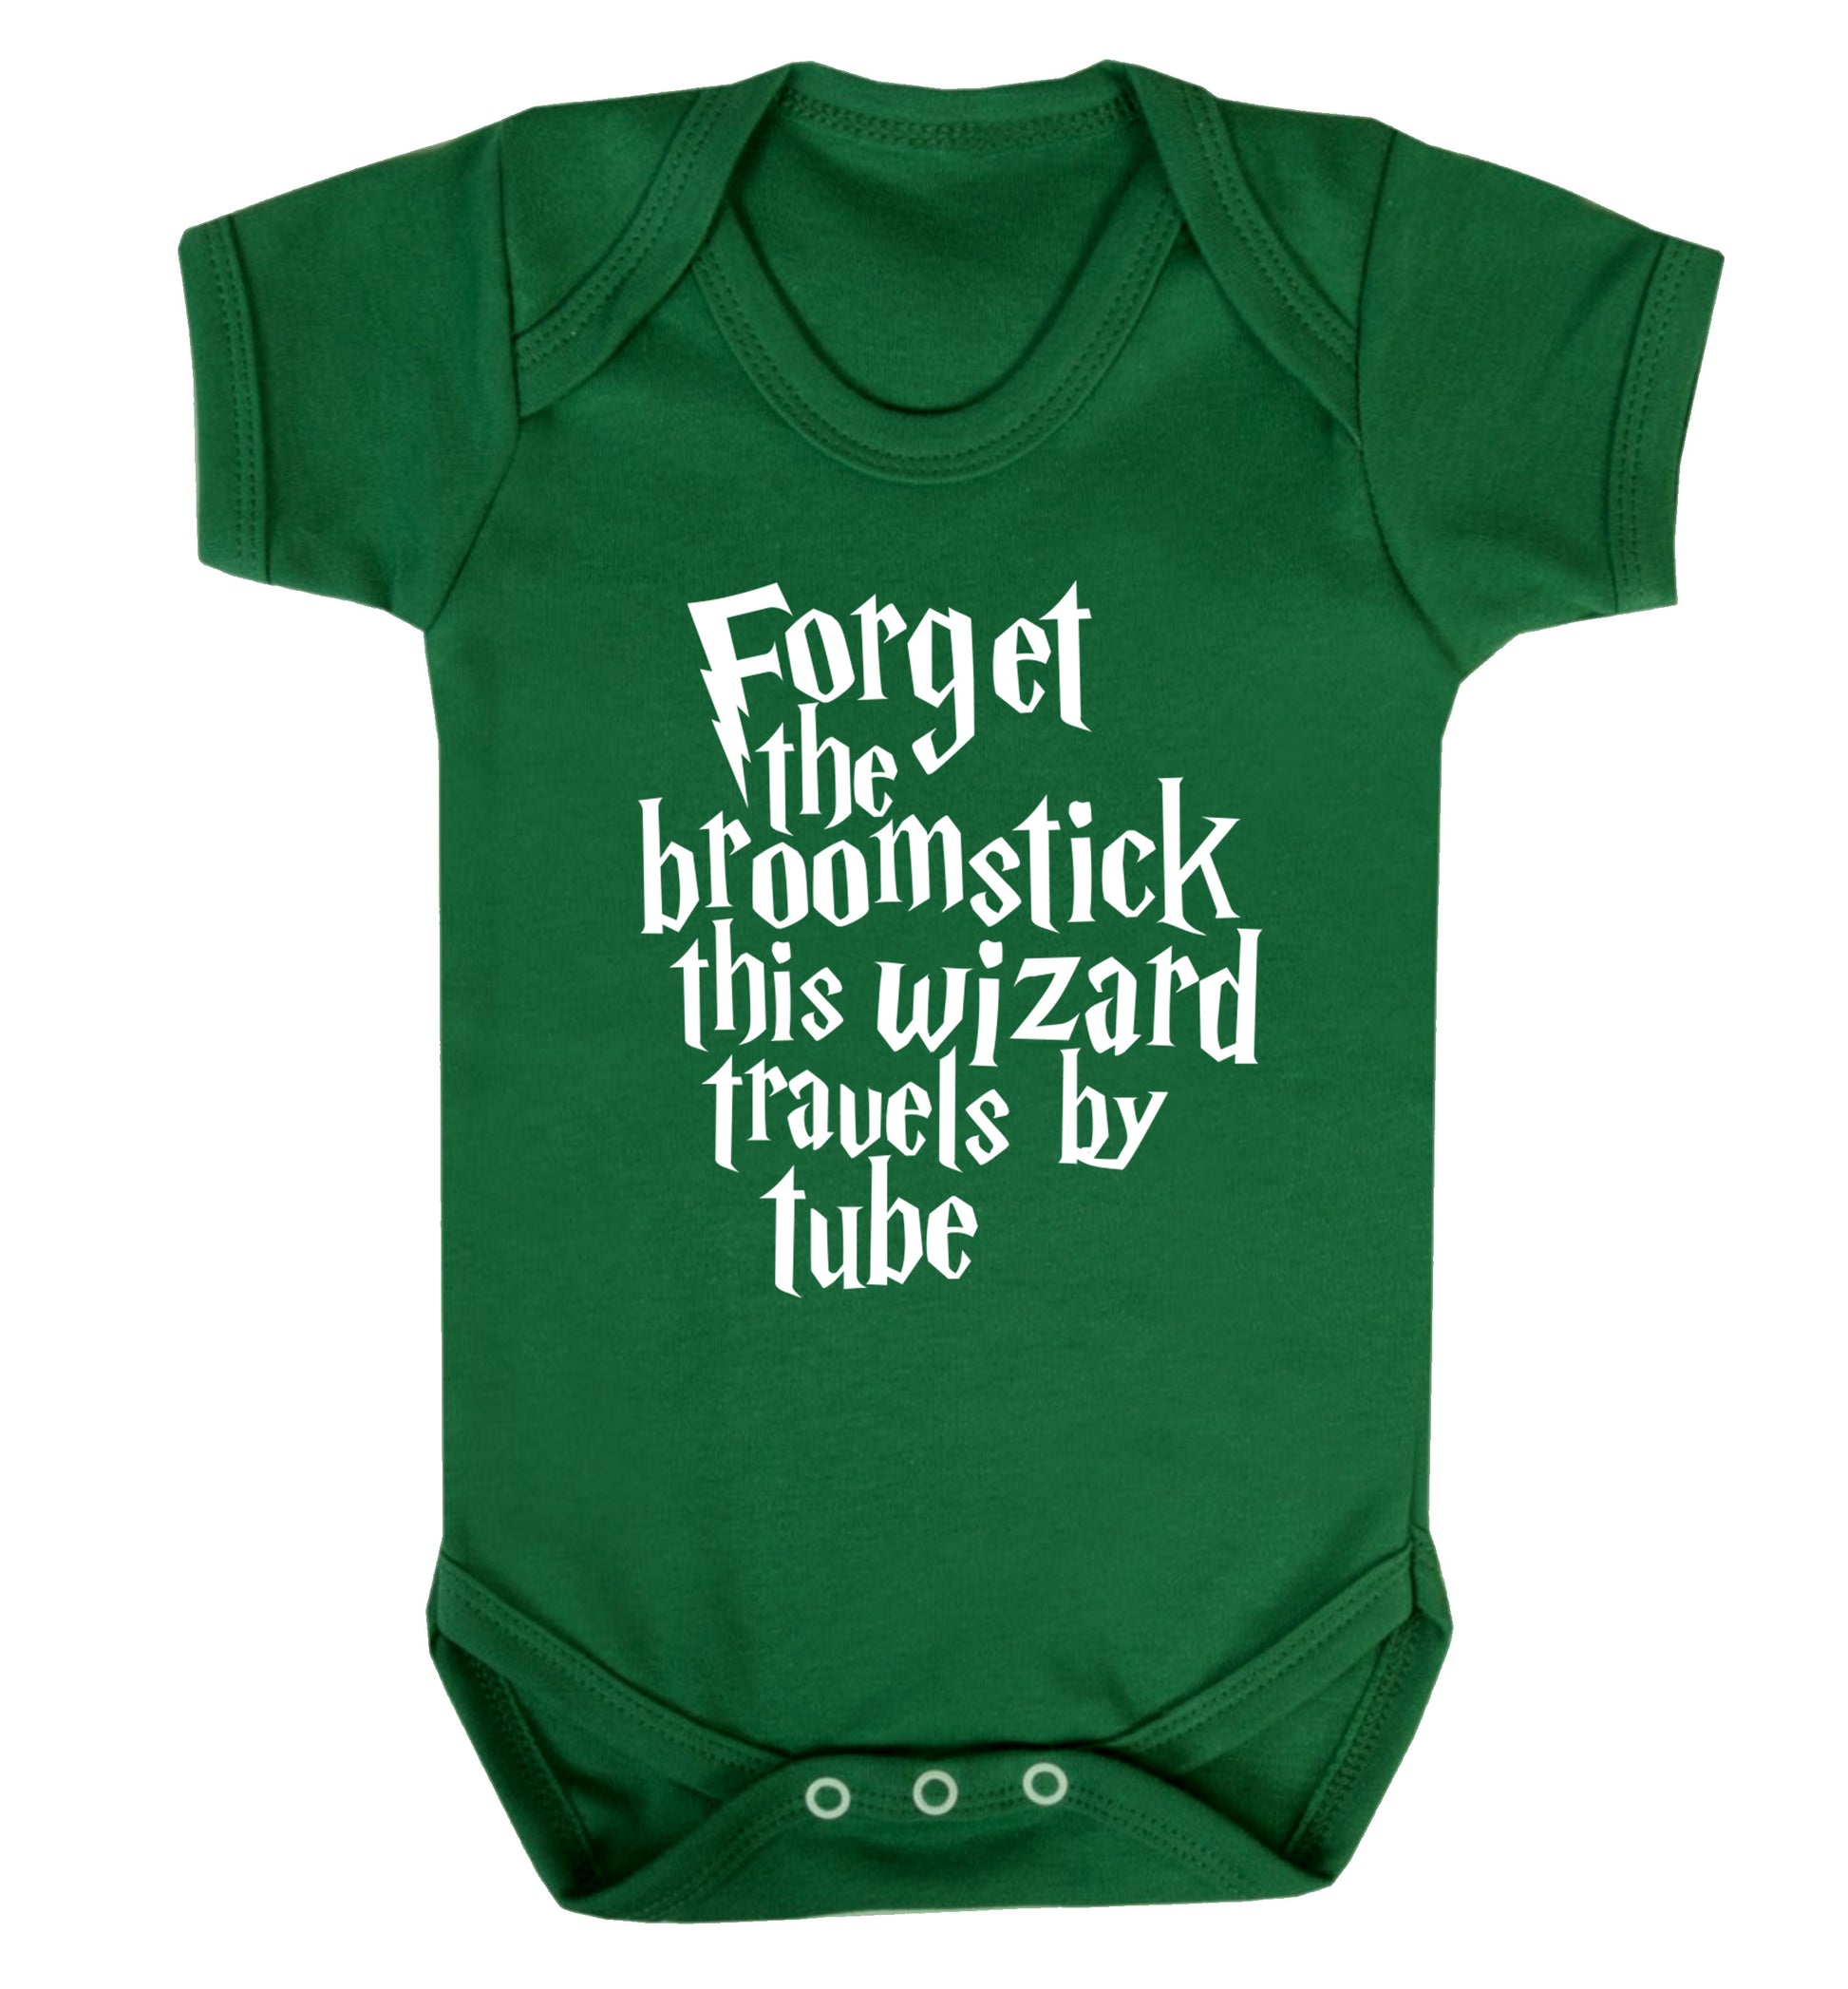 Forget the broomstick this wizard travels by tube Baby Vest green 18-24 months